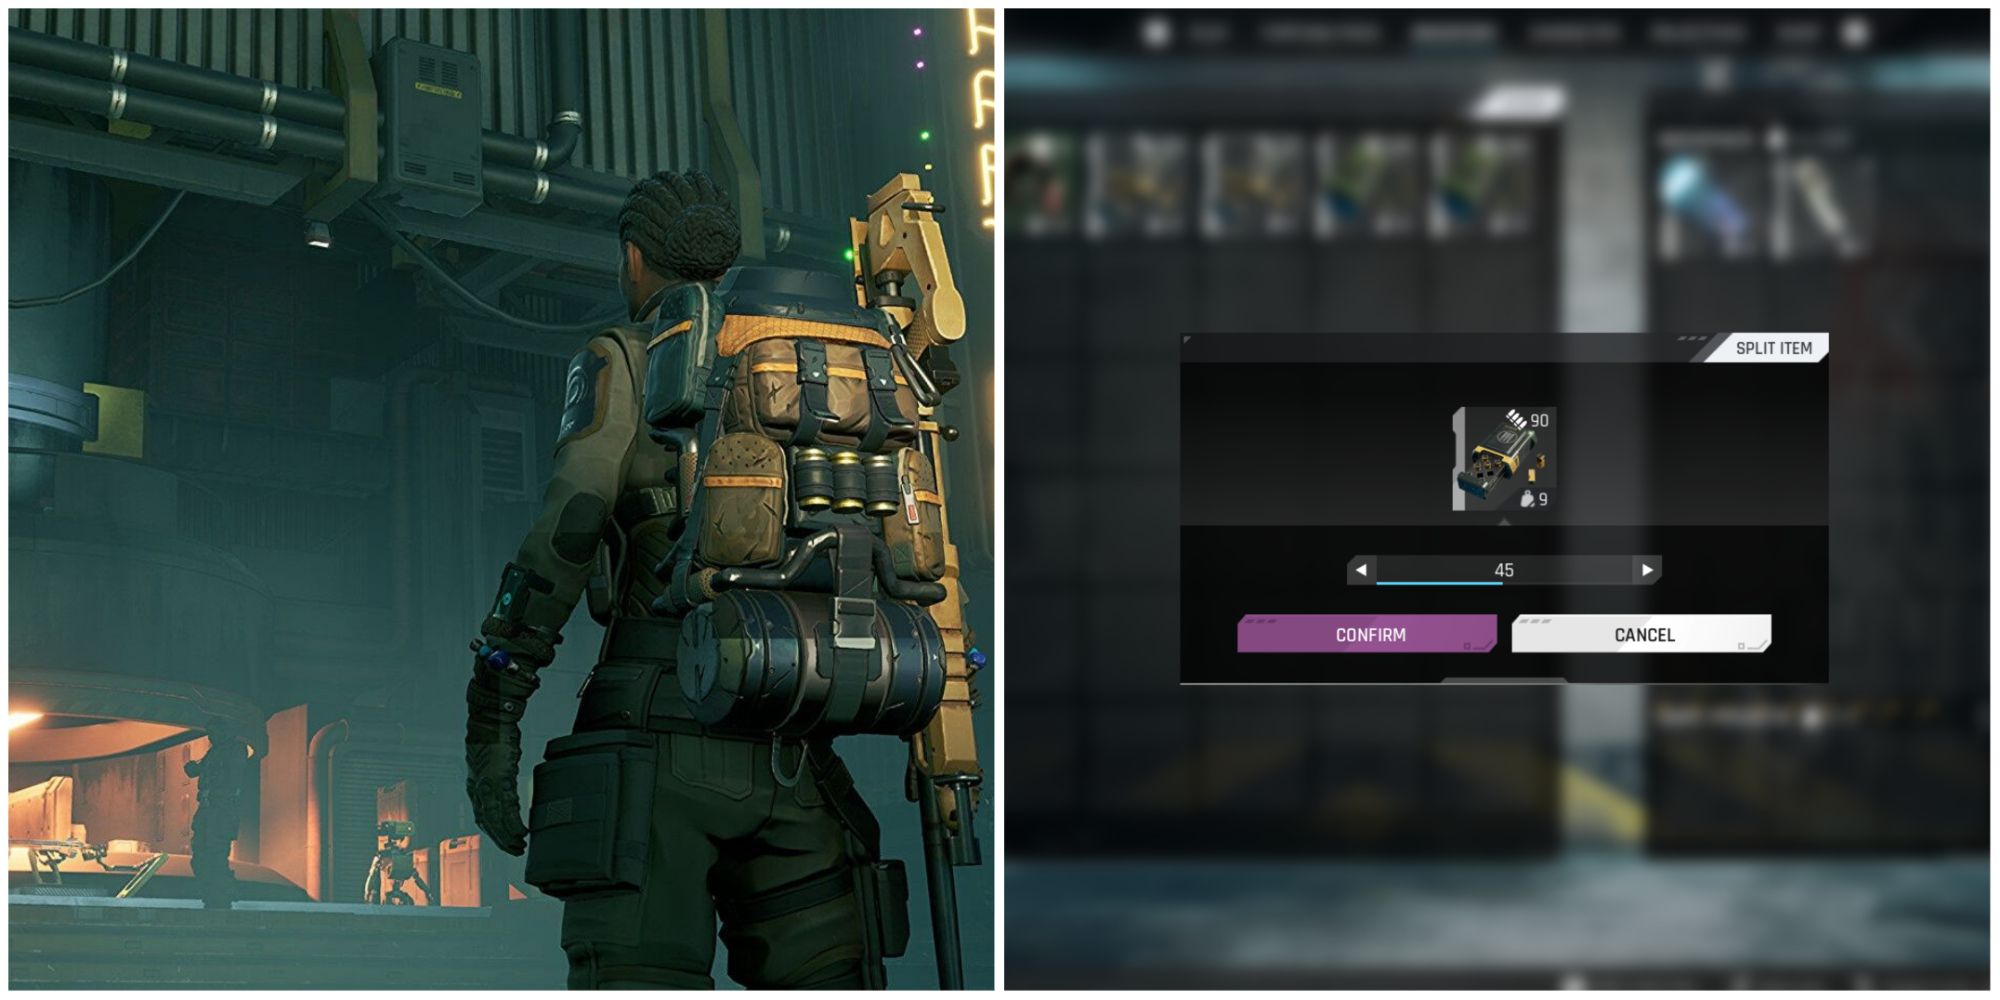 The Cycle Frontier split image with a player's backpack and the 'item splitting' screen